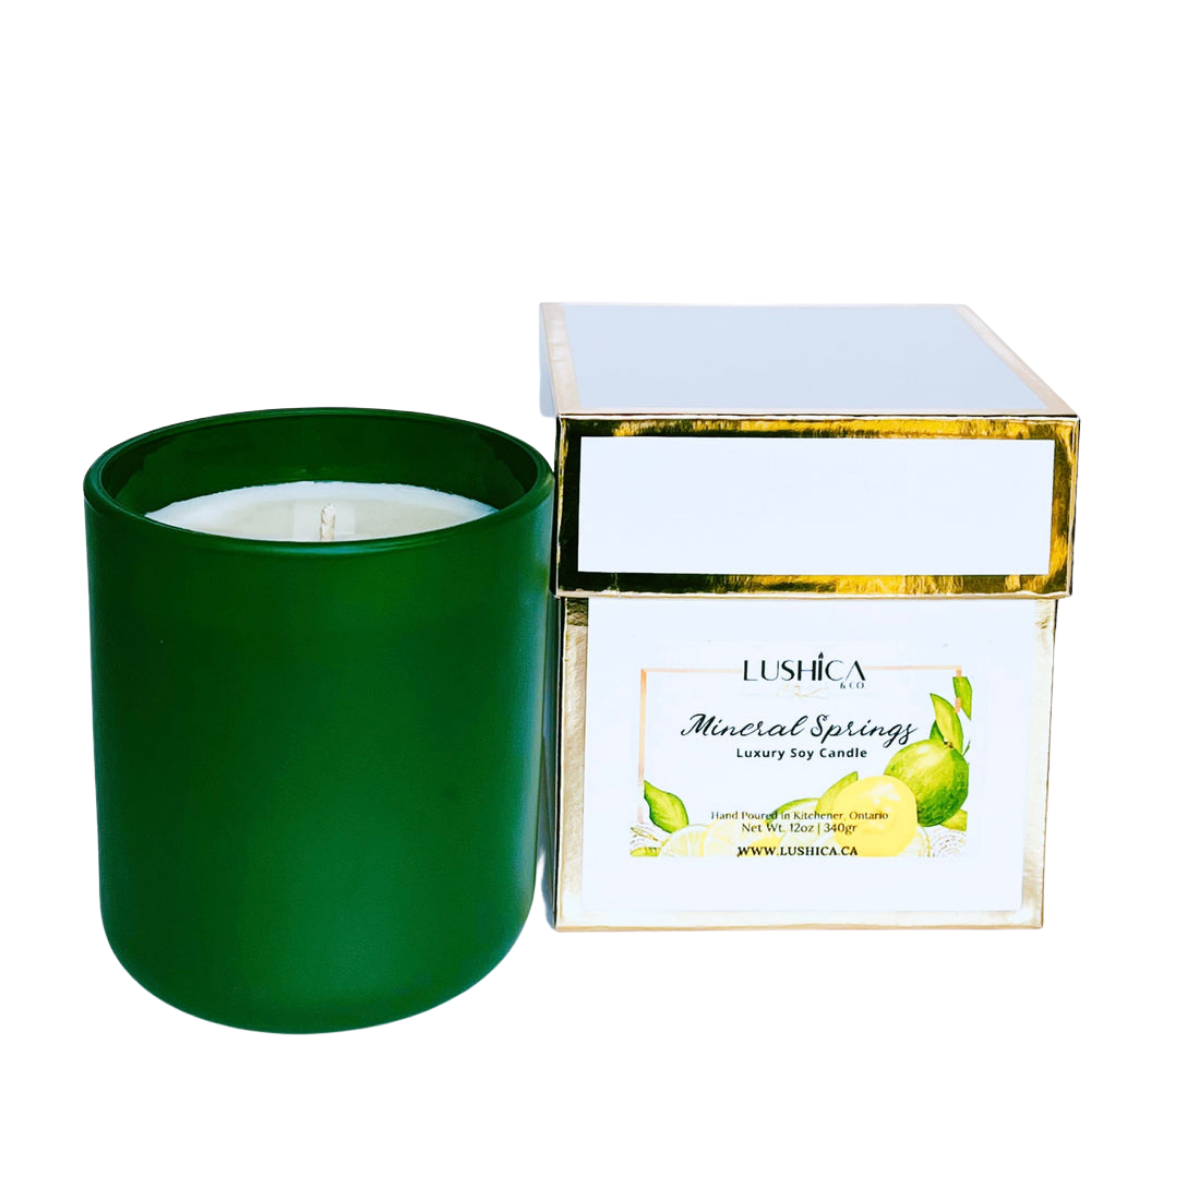 Mineral Springs Luxury Soy Candle